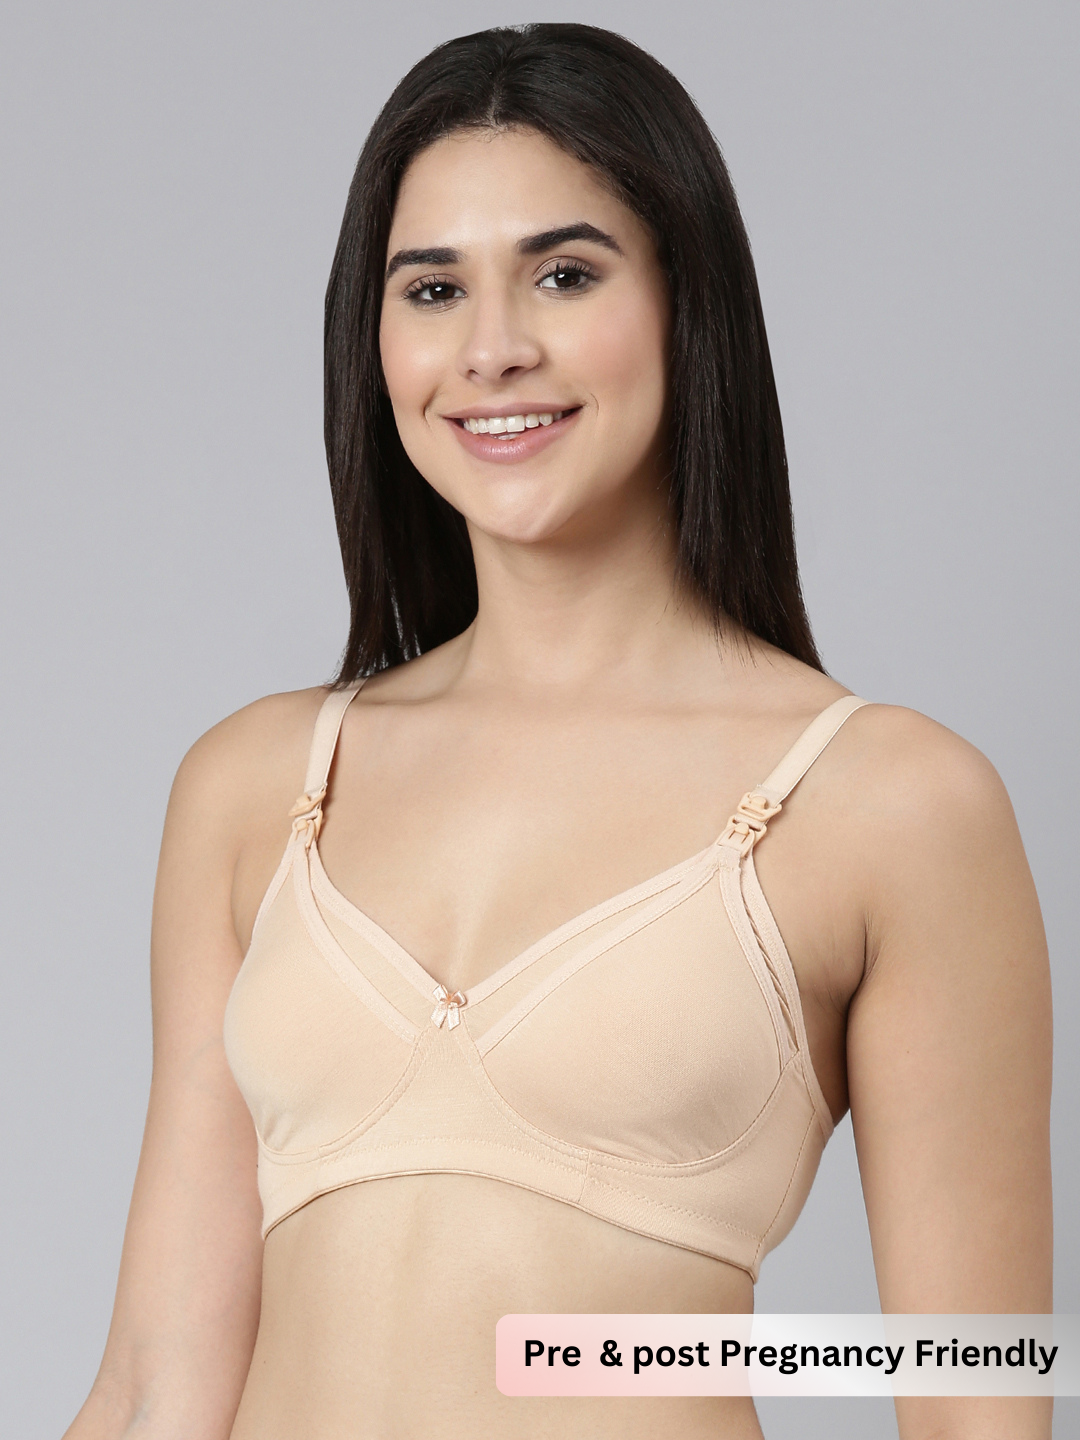 Buy Fabura mother care Cotton Maternity Bra-non padded nor wired-Dark Pink  color, Bra, Maternity Bra, Non padded Bra, Feeding Bra, Pink Bra